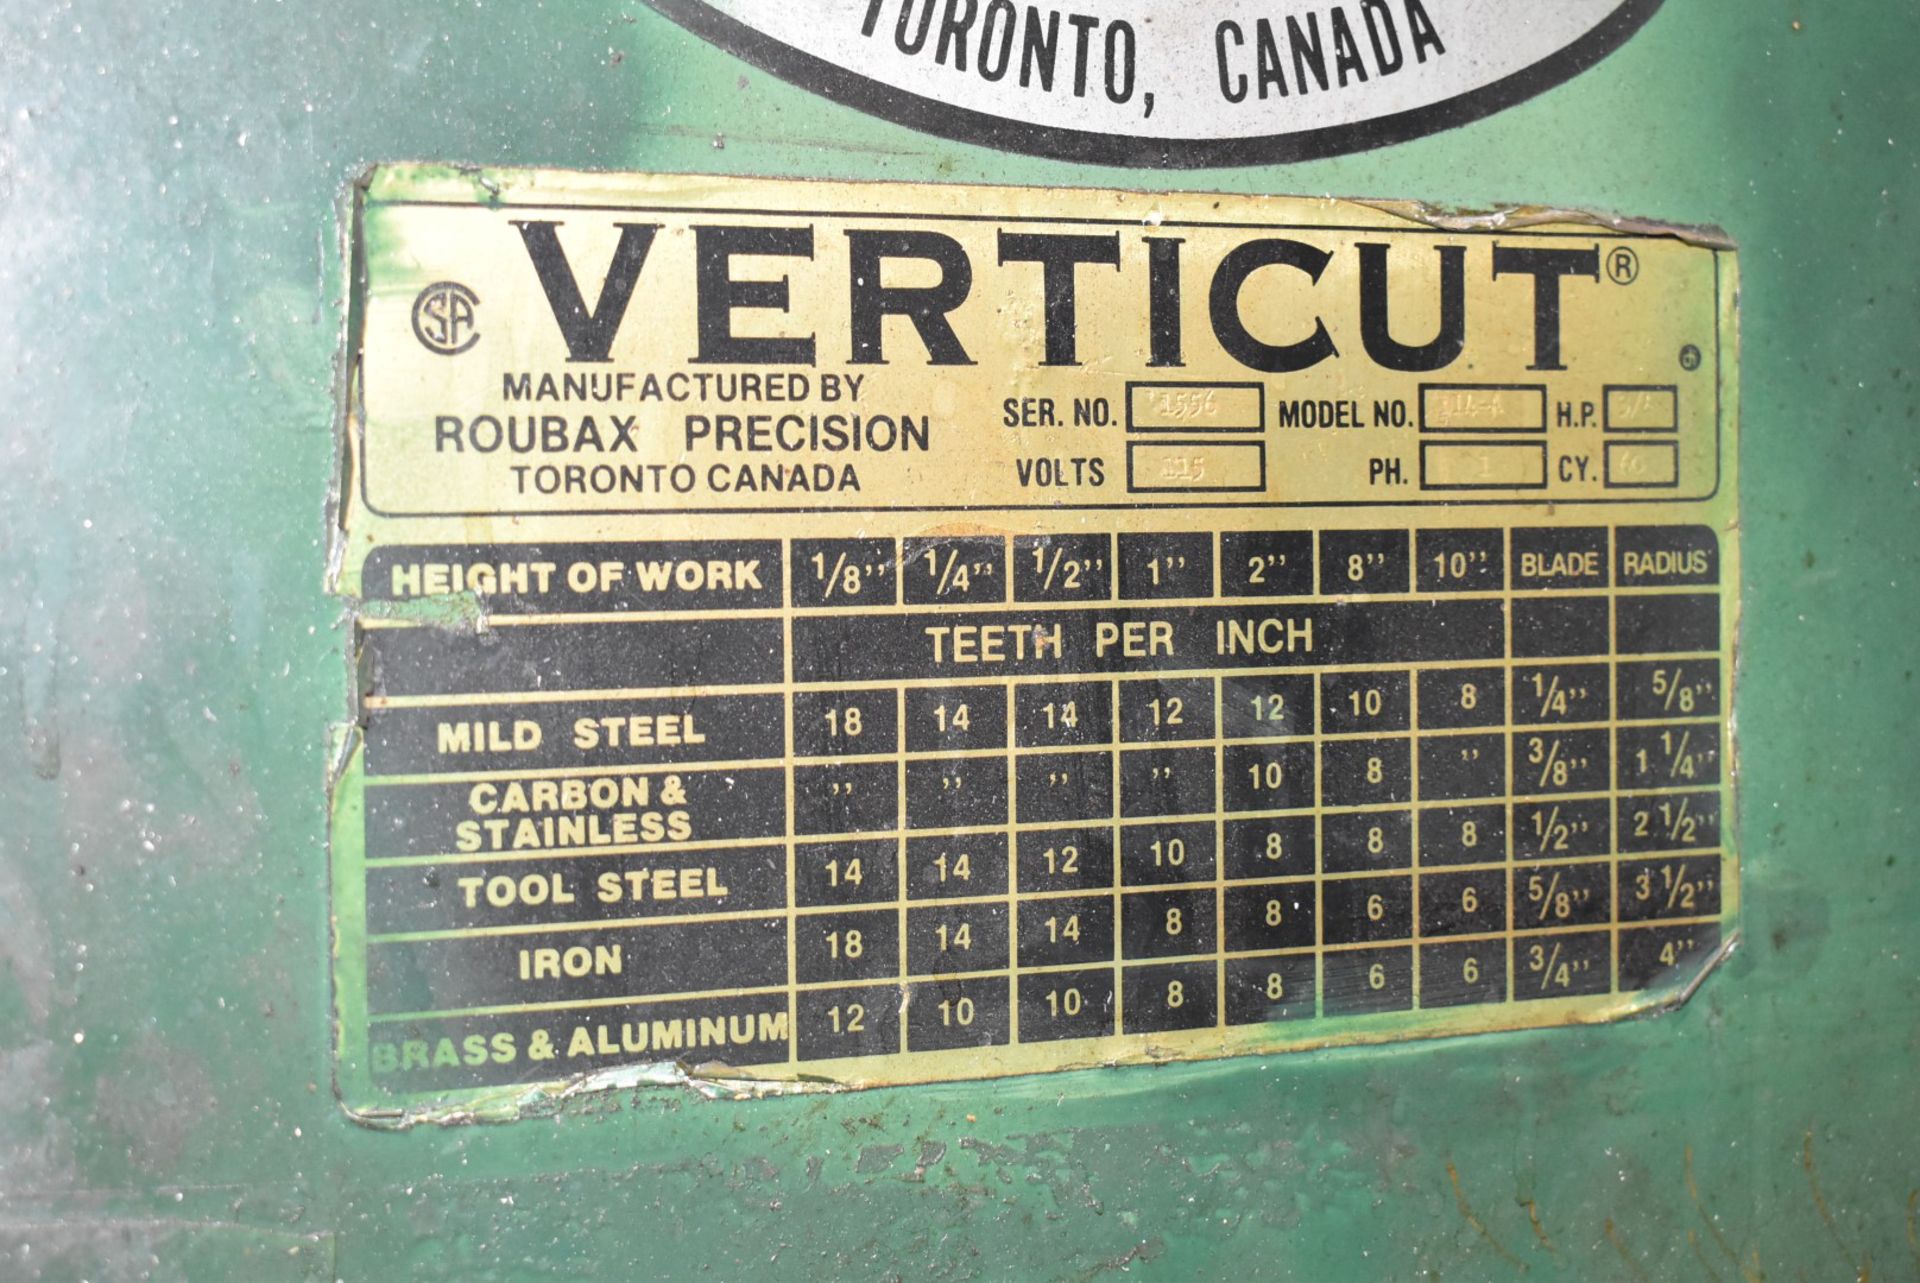 VERTICUT 114-A VERTICAL BANDSAW WITH 18.5" X 30.25" TABLE, 3/4 HP MOTOR, 115V/1PH/60HZ, S/N 1556 ( - Image 4 of 4